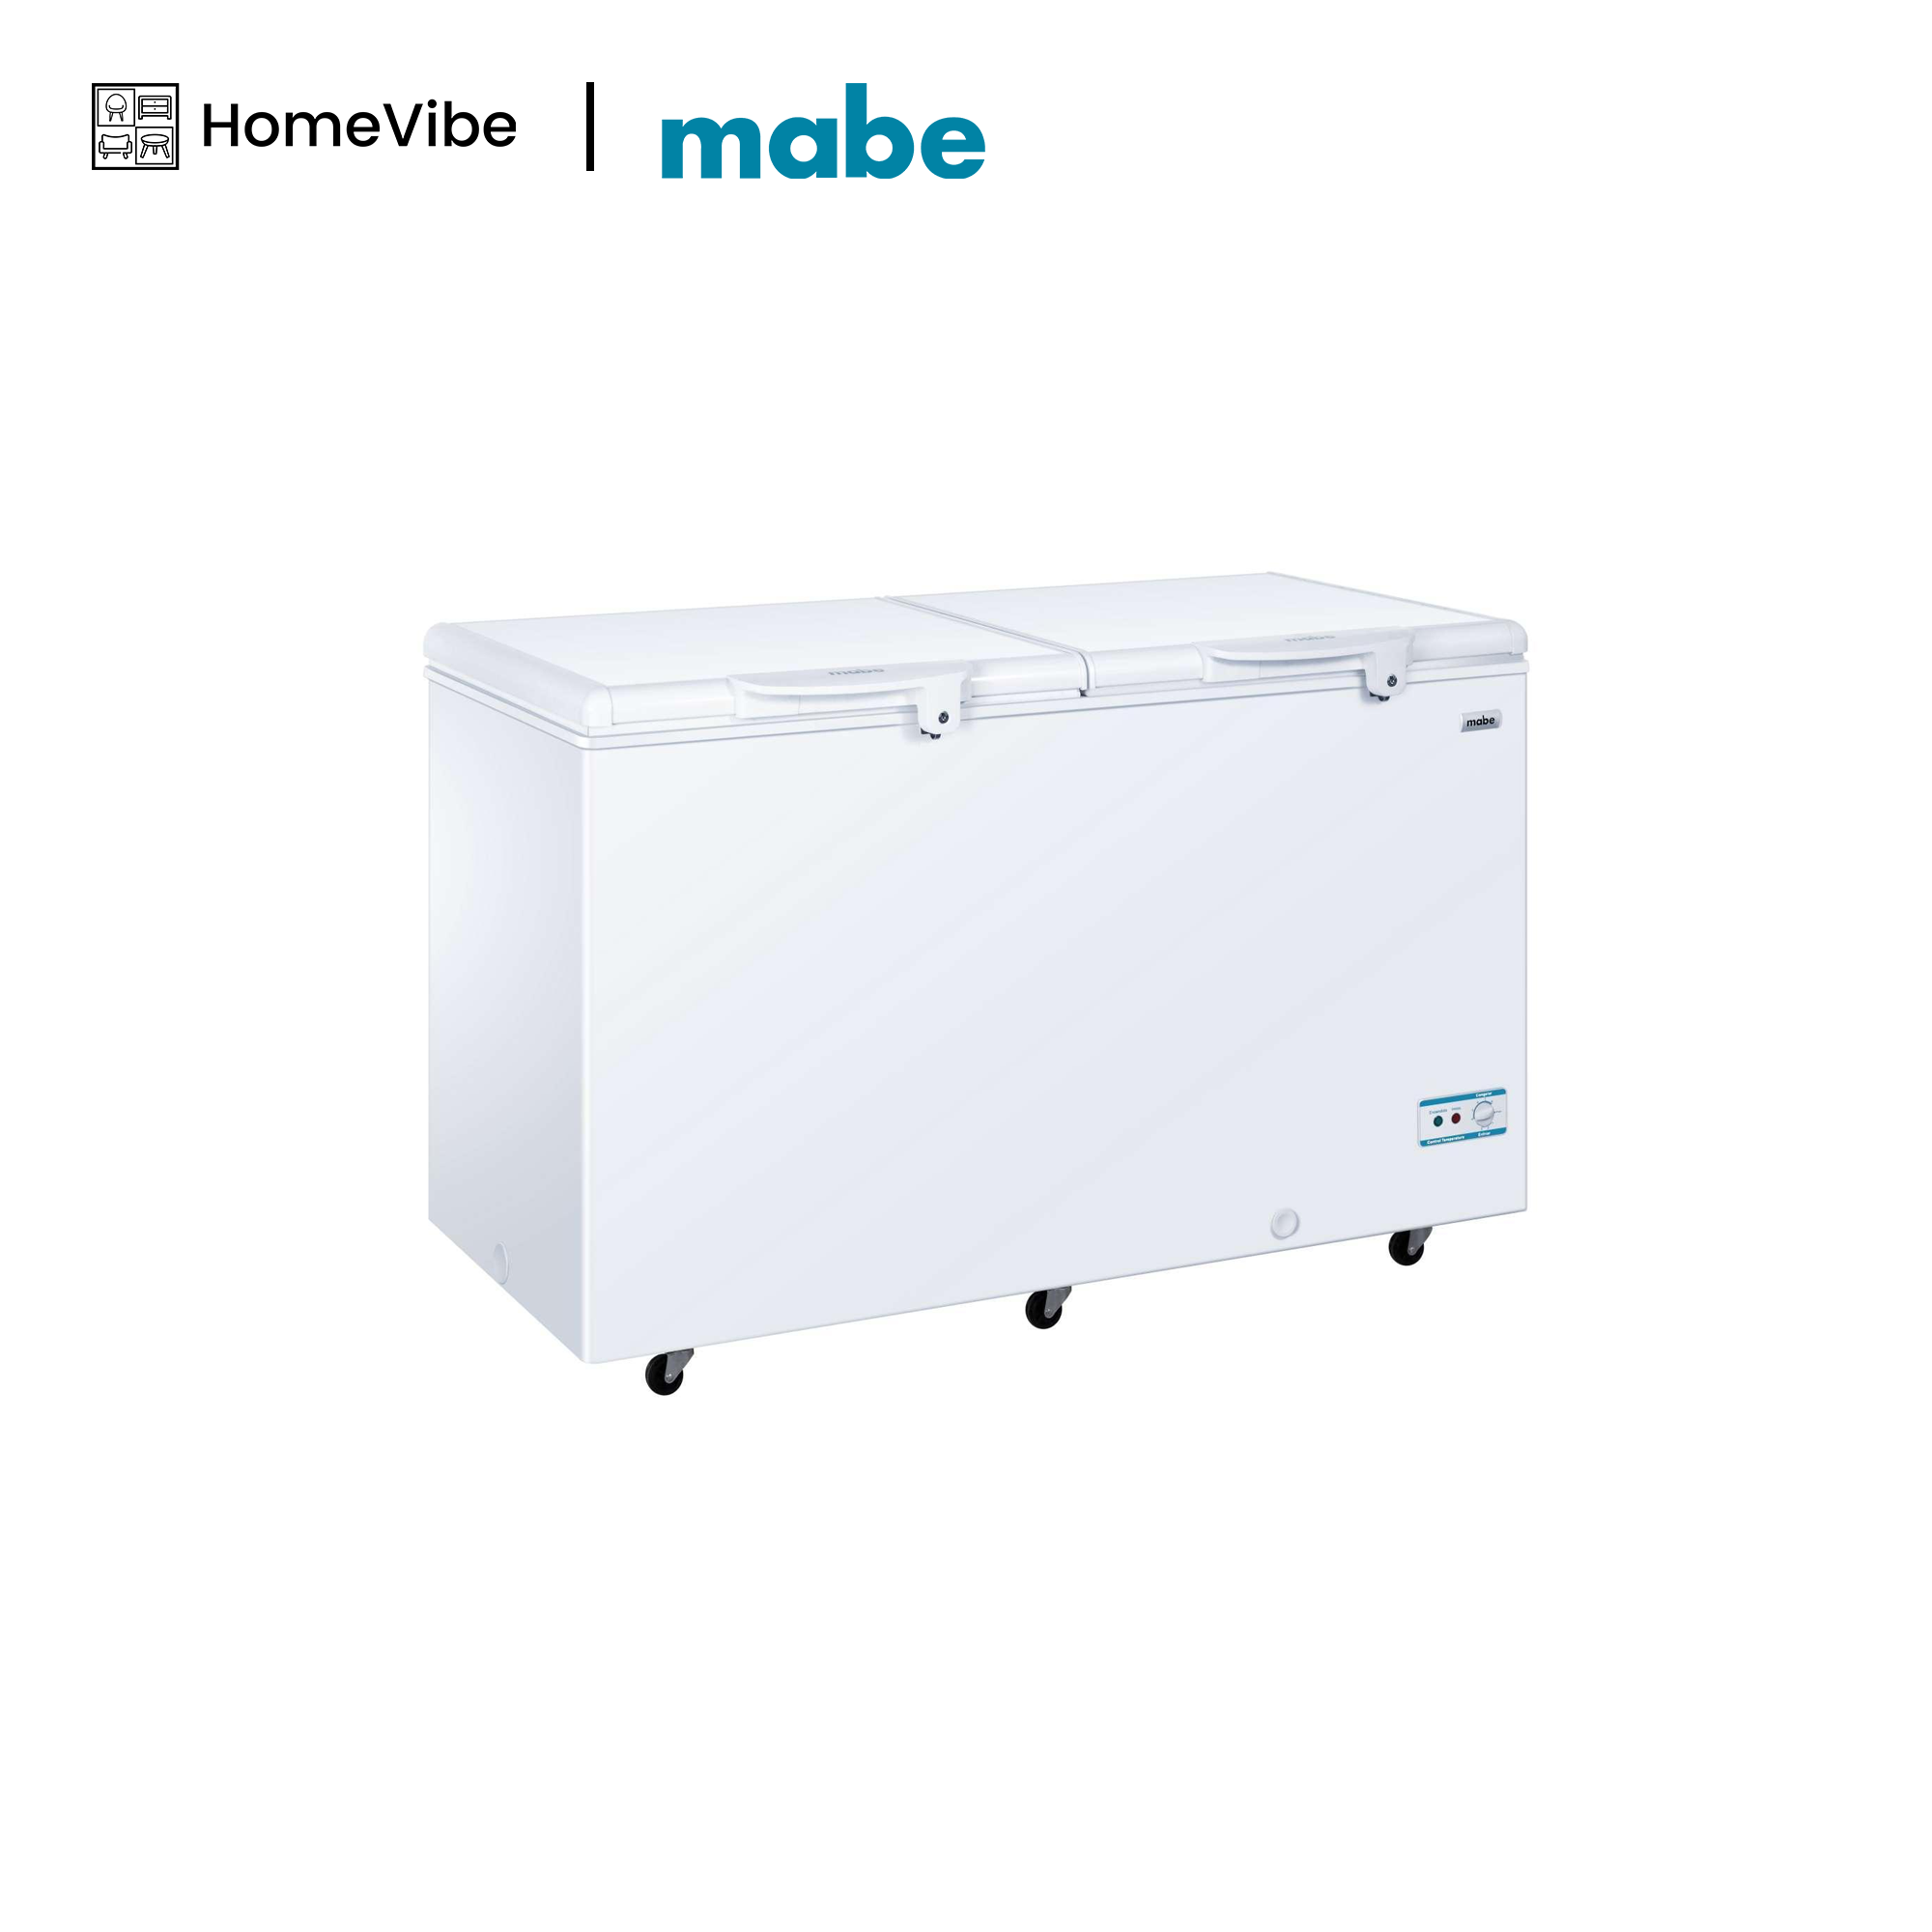 Mabe 15cuft Dual Function Chest Freezer FMM420HEWWX1